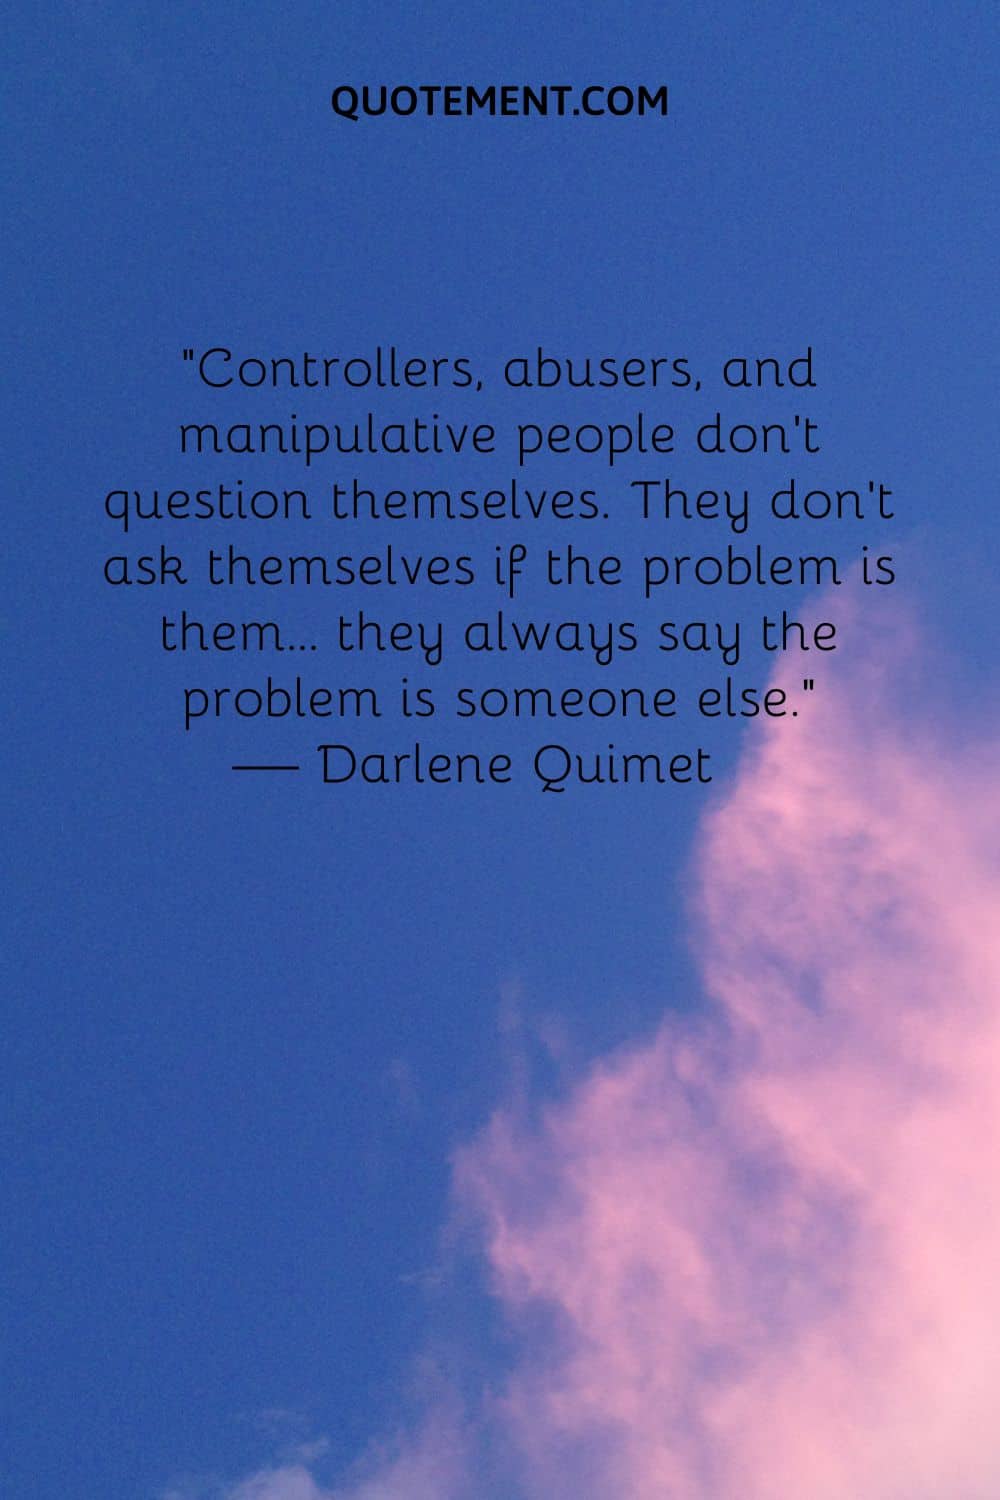 Controllers, abusers, and manipulative people don’t question themselves